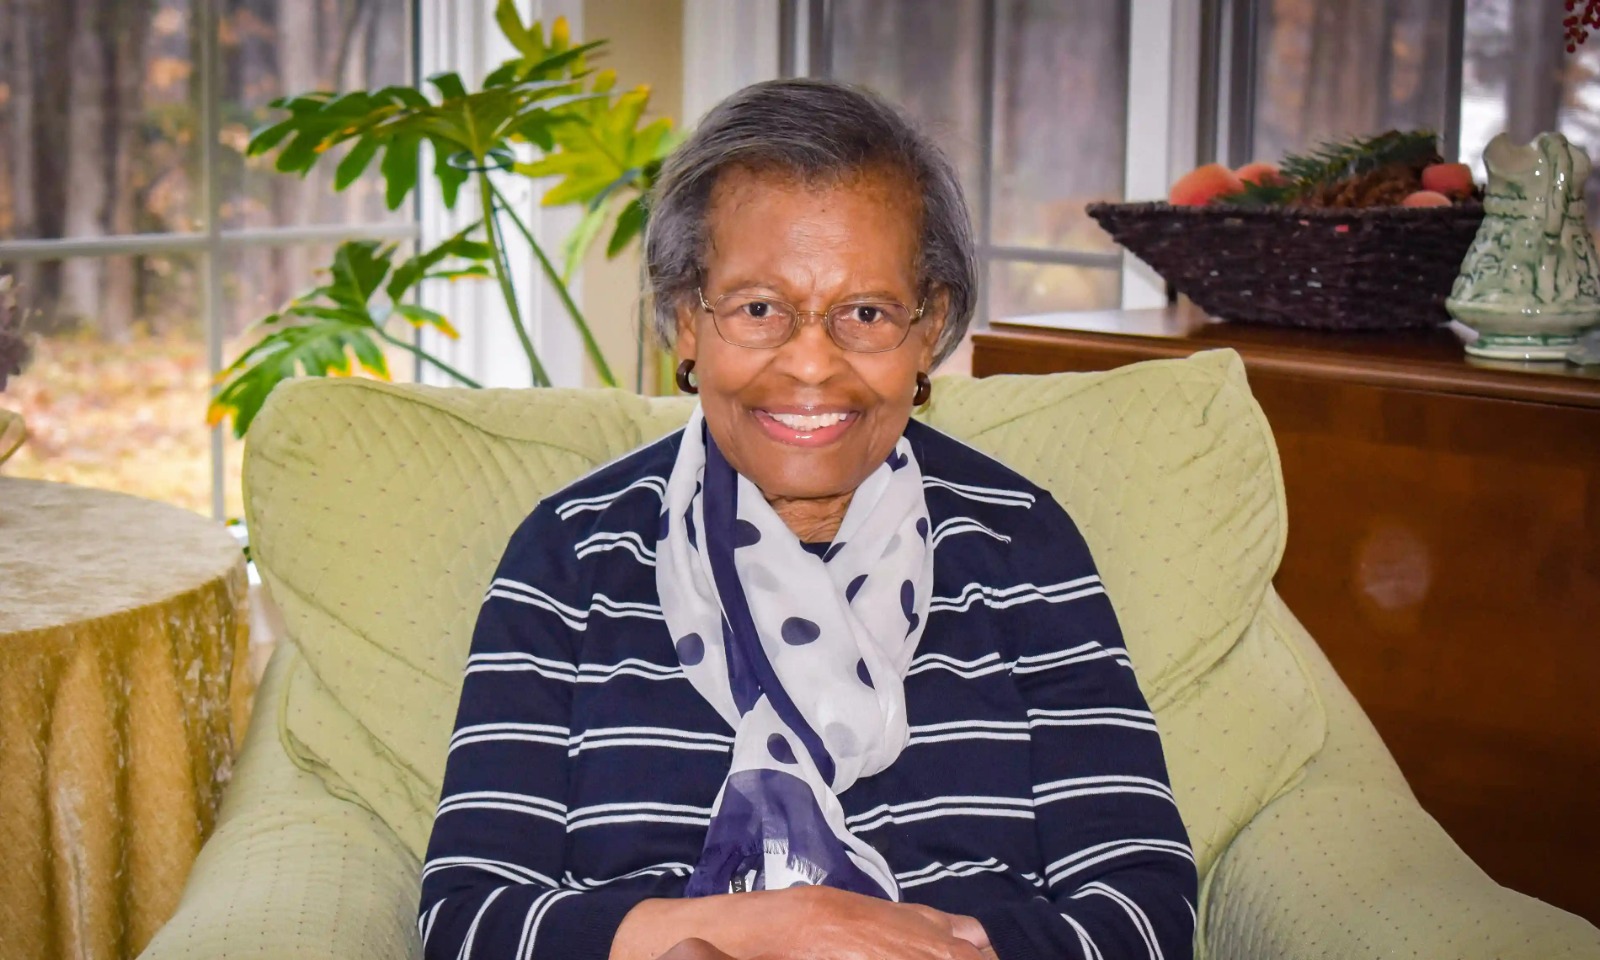 Meet Dr. Gladys West, the black woman who invented the GPS